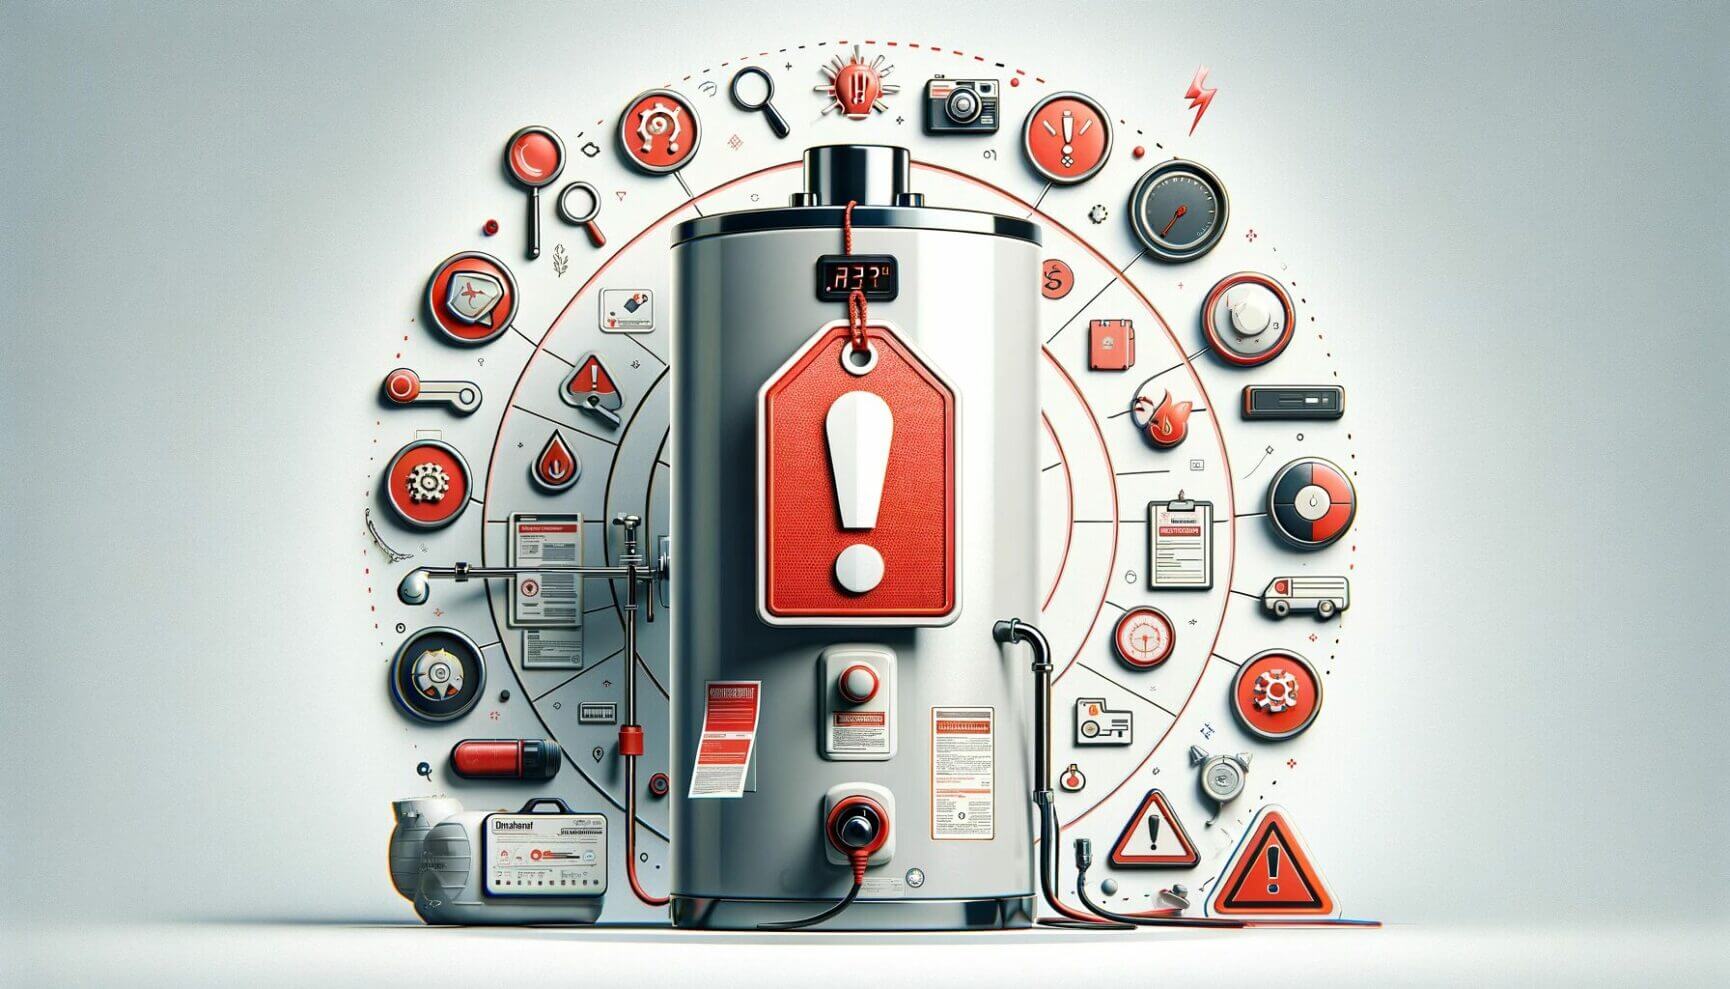 An image of a water heater surrounded by various icons.